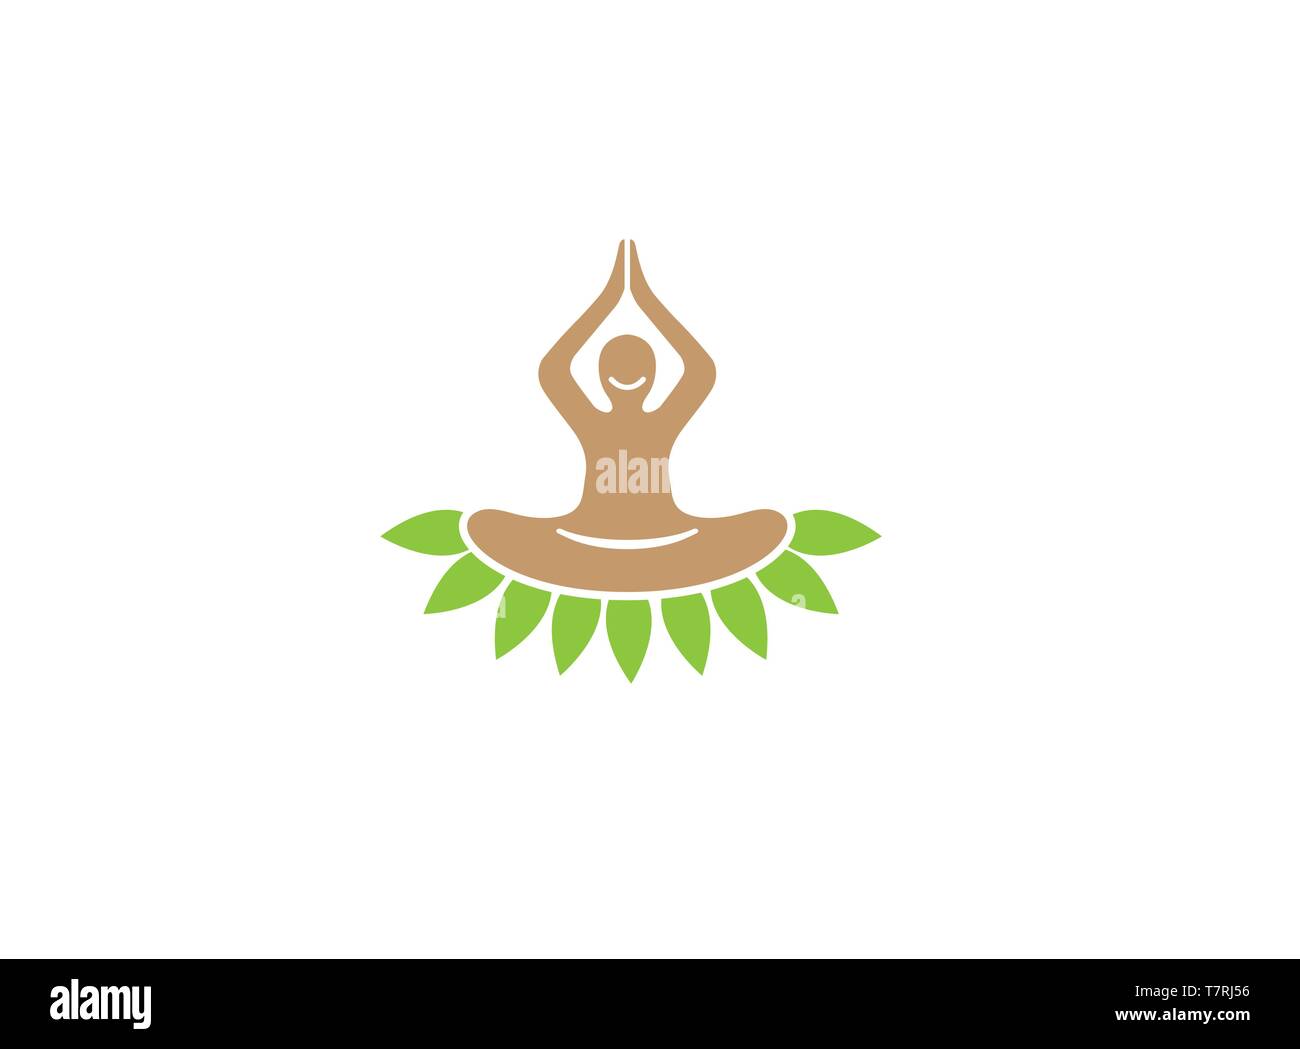 A person set on leaves hands up and smile doing meditation and yoga for health Green logo design illustration on white background Stock Vector